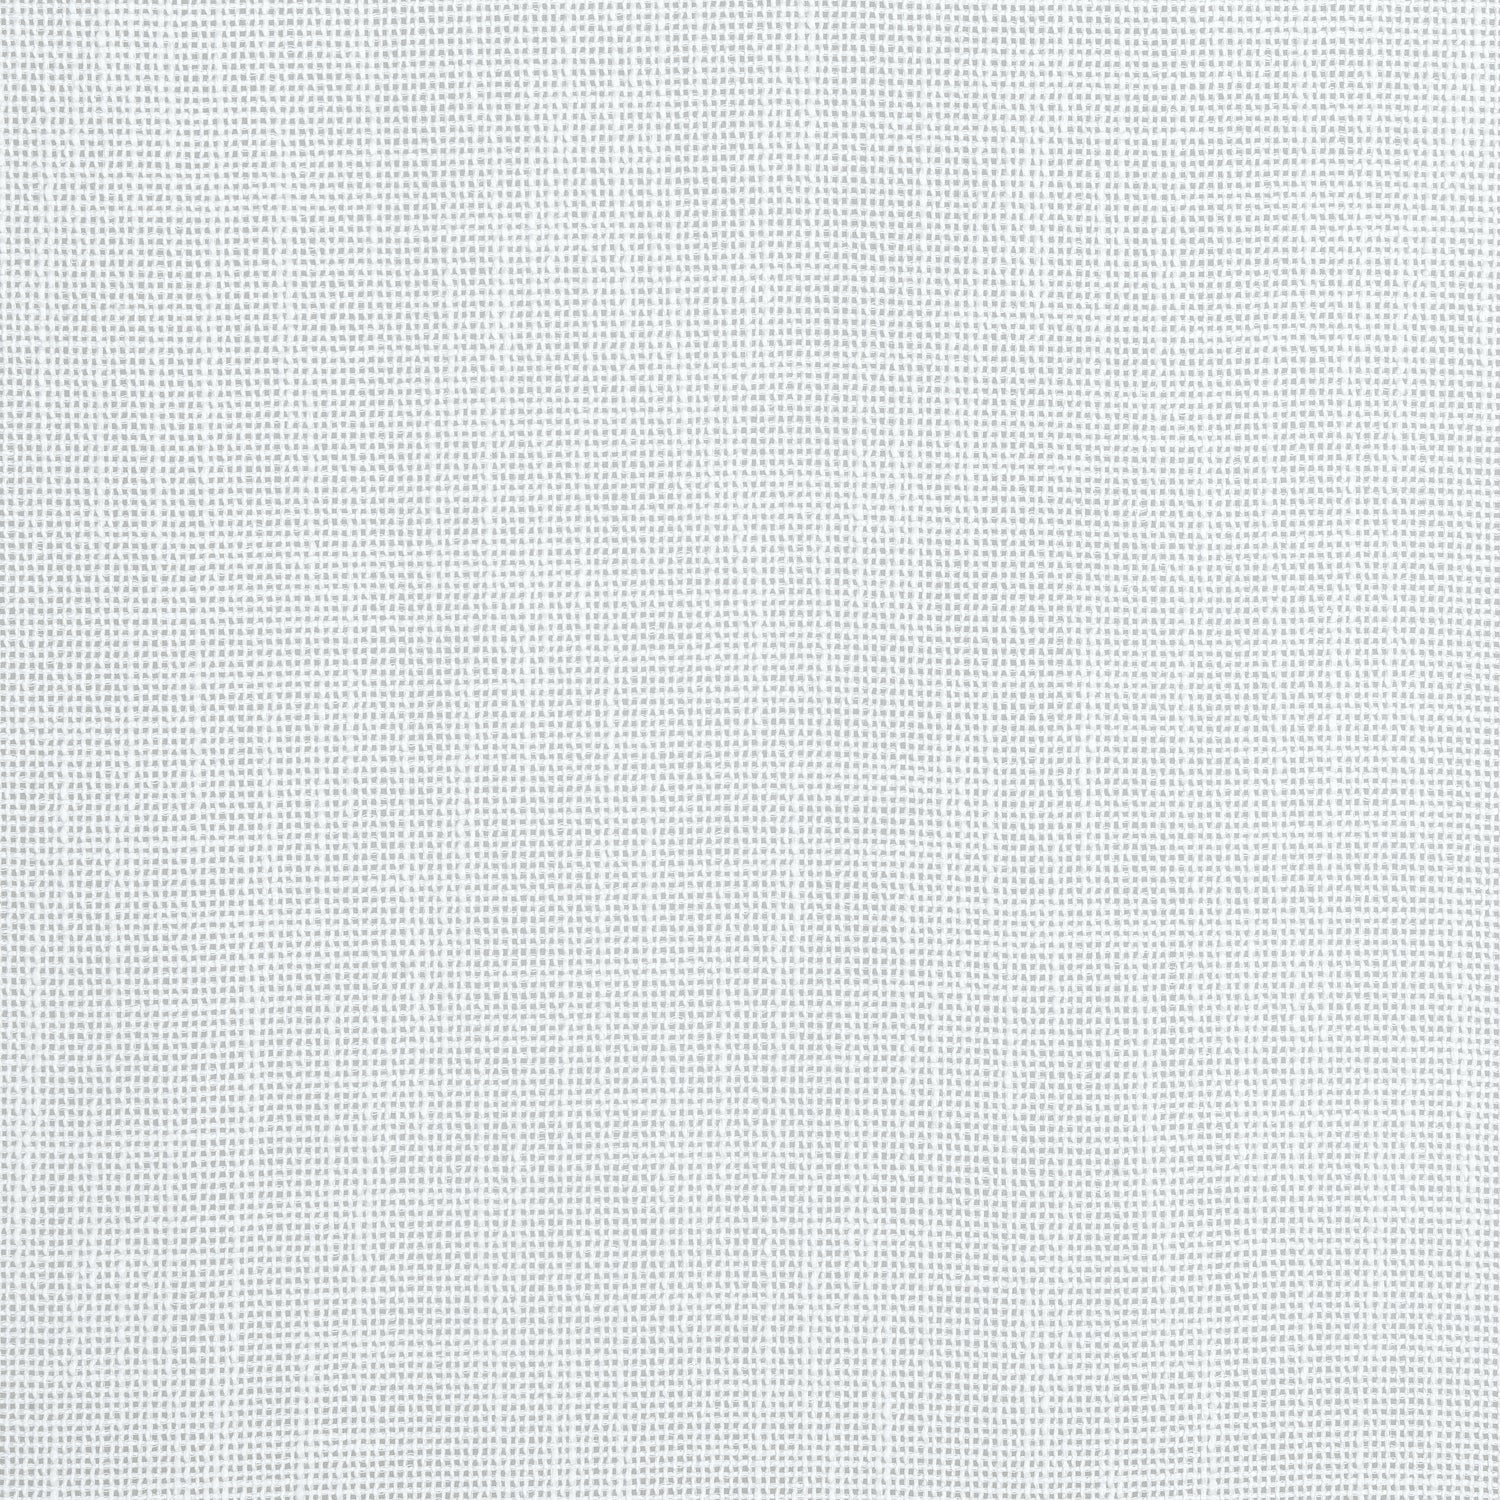 Mistral fabric in fog color - pattern number FWW8230 - by Thibaut in the Aura collection